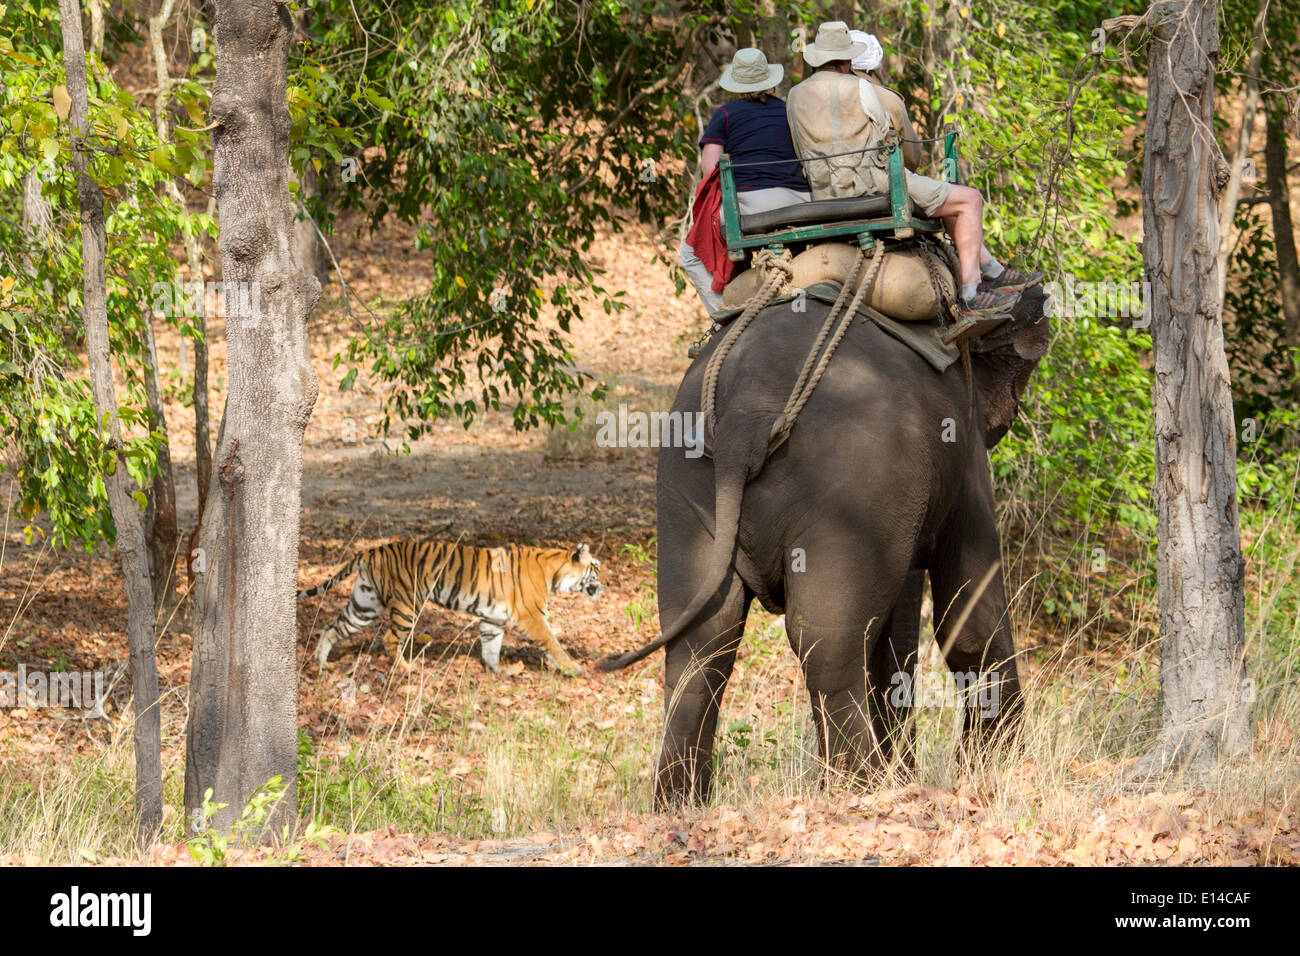 Tiger crossing in front of elephant, game viewers watching, Bandhavgarh tiger reserve, India, Asia Stock Photo